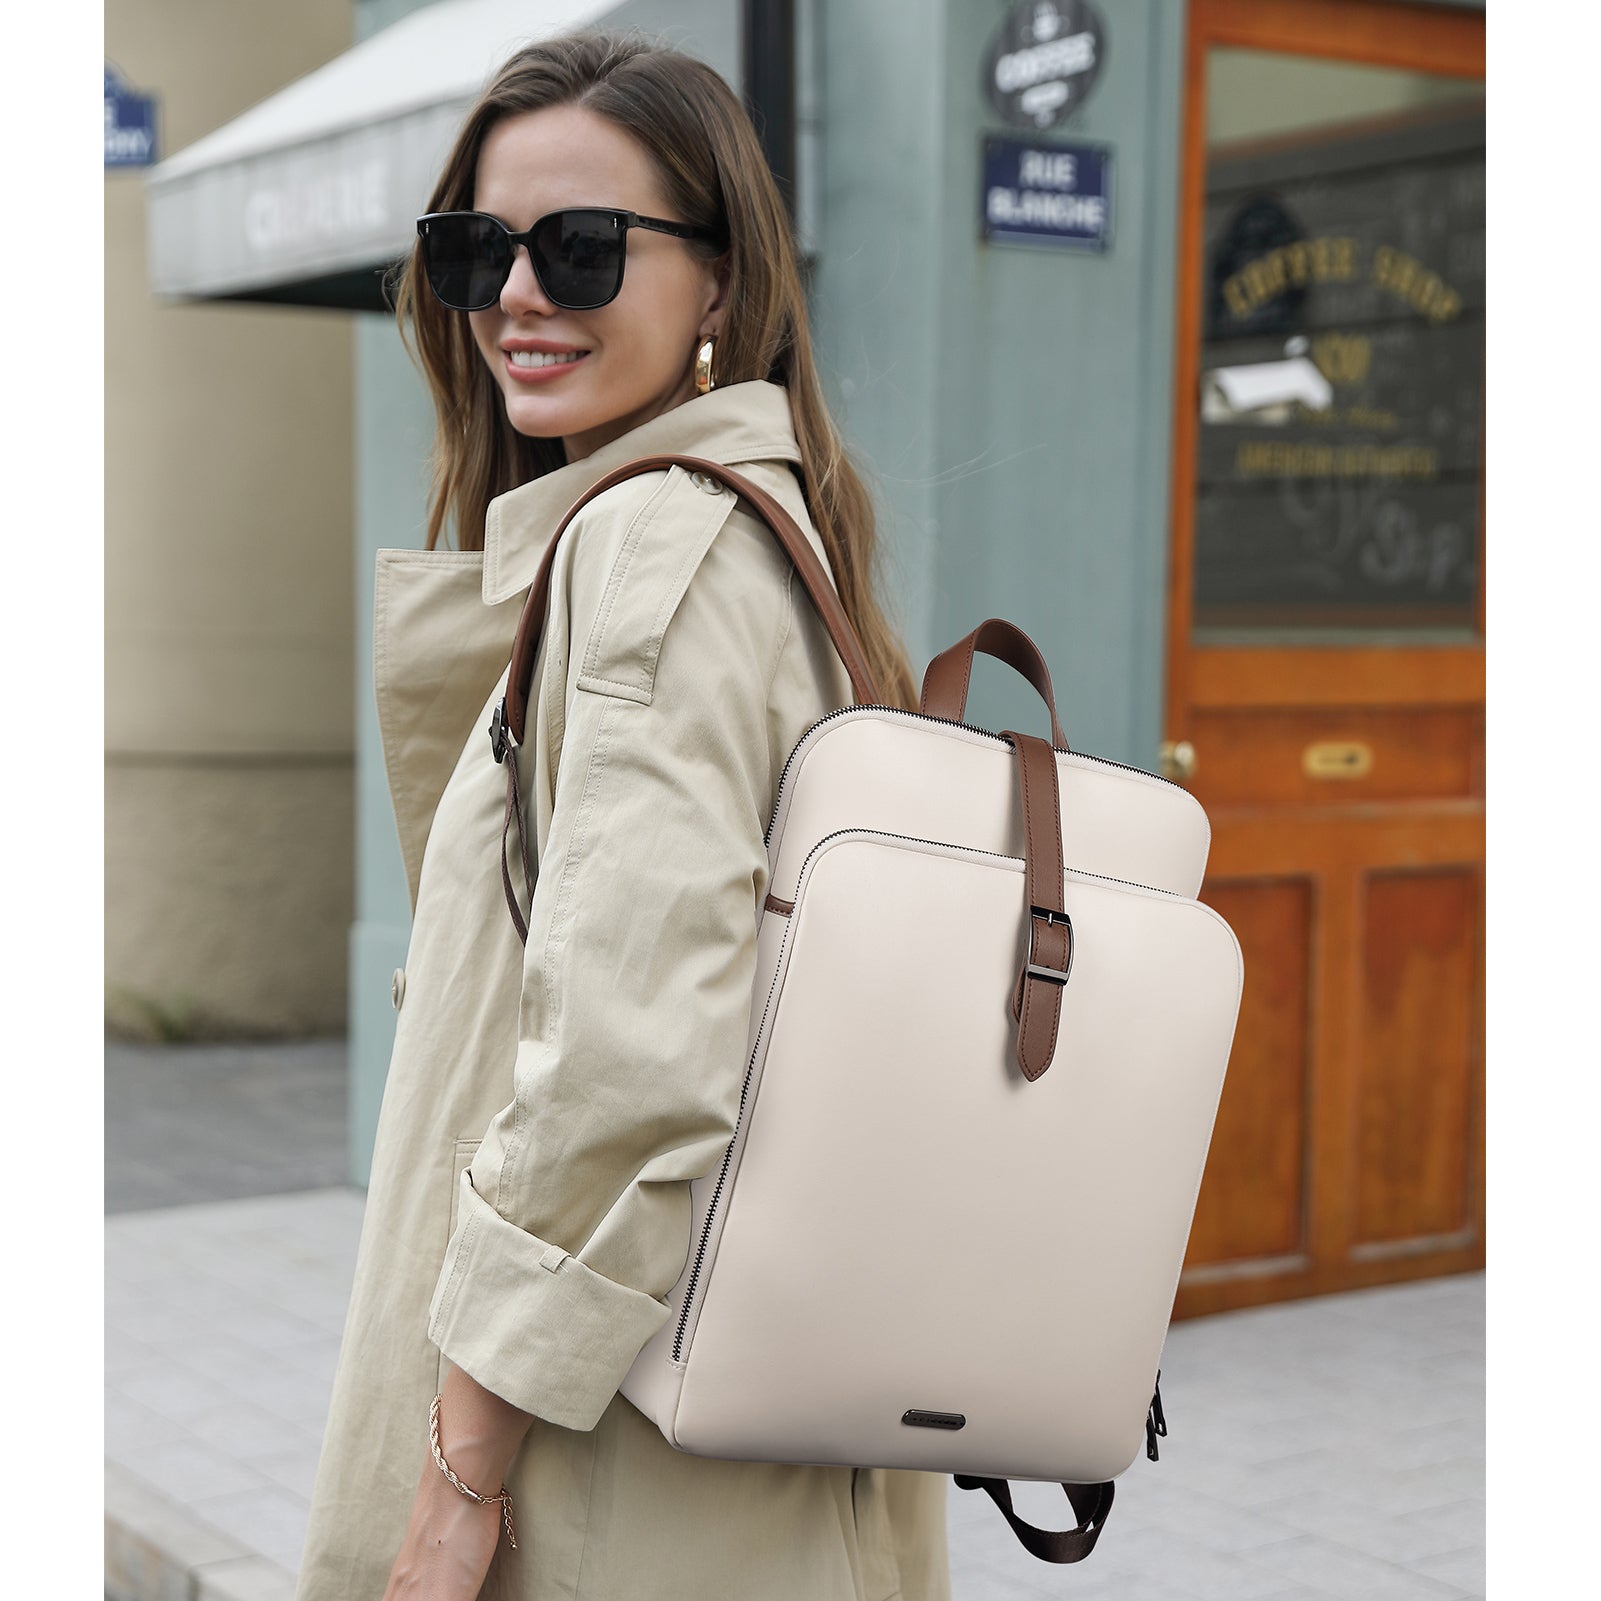 Ivory White Leather Backpack for Women Laptop Backpack Hold 